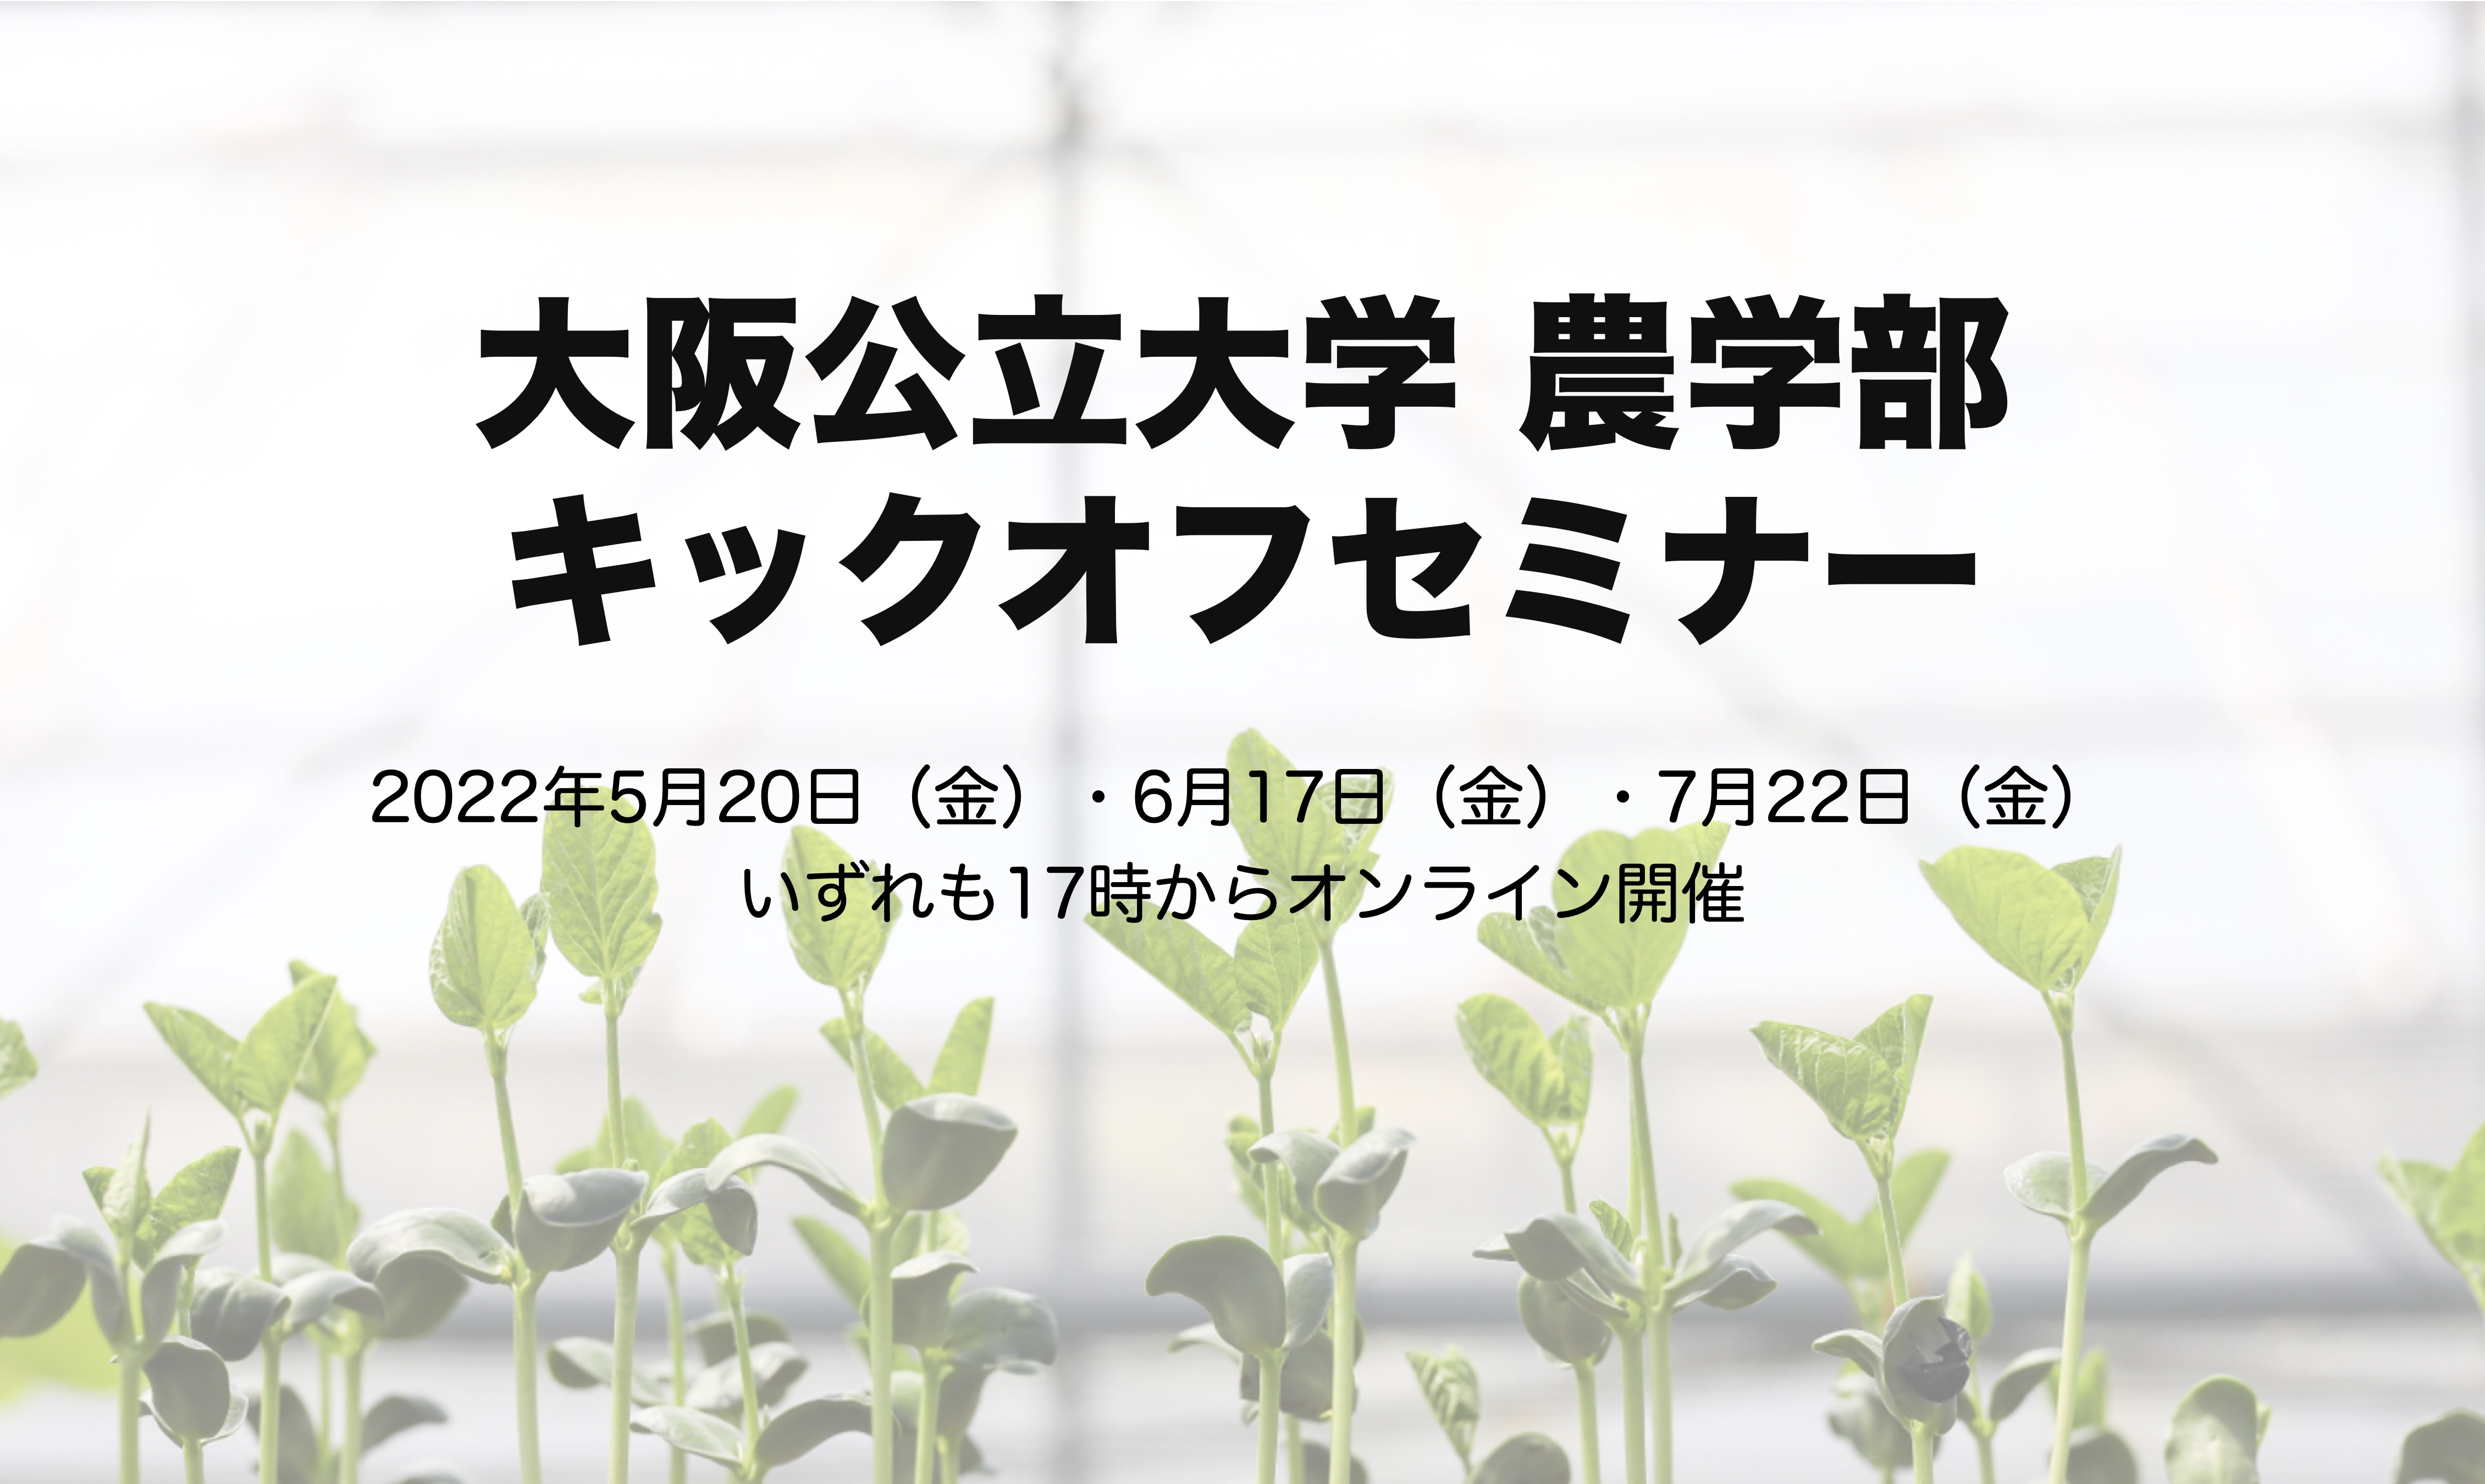 Kick-off Seminars for School of Agriculture (in Japanese)